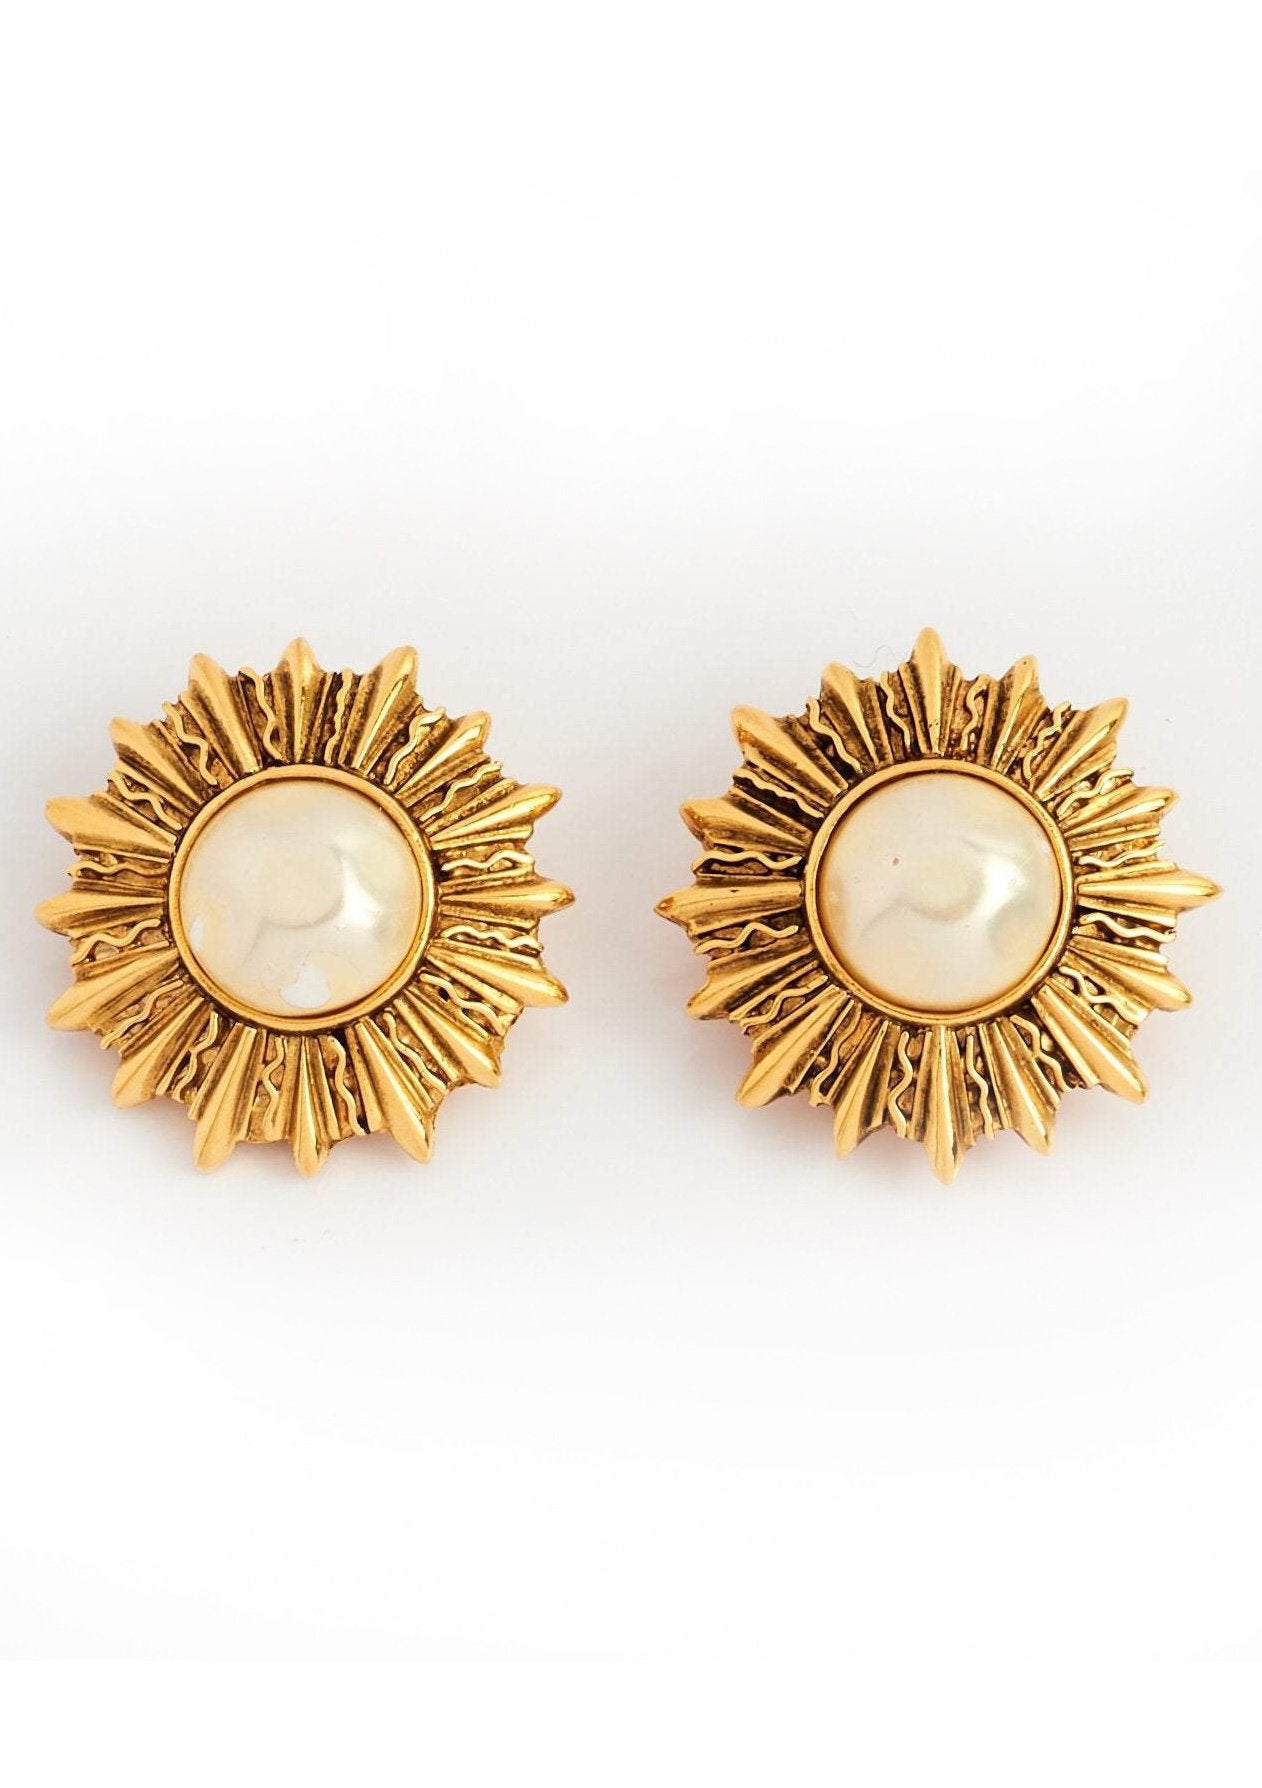 Chanel Vintage Starburst Earrings, Gold Plated - 1980's